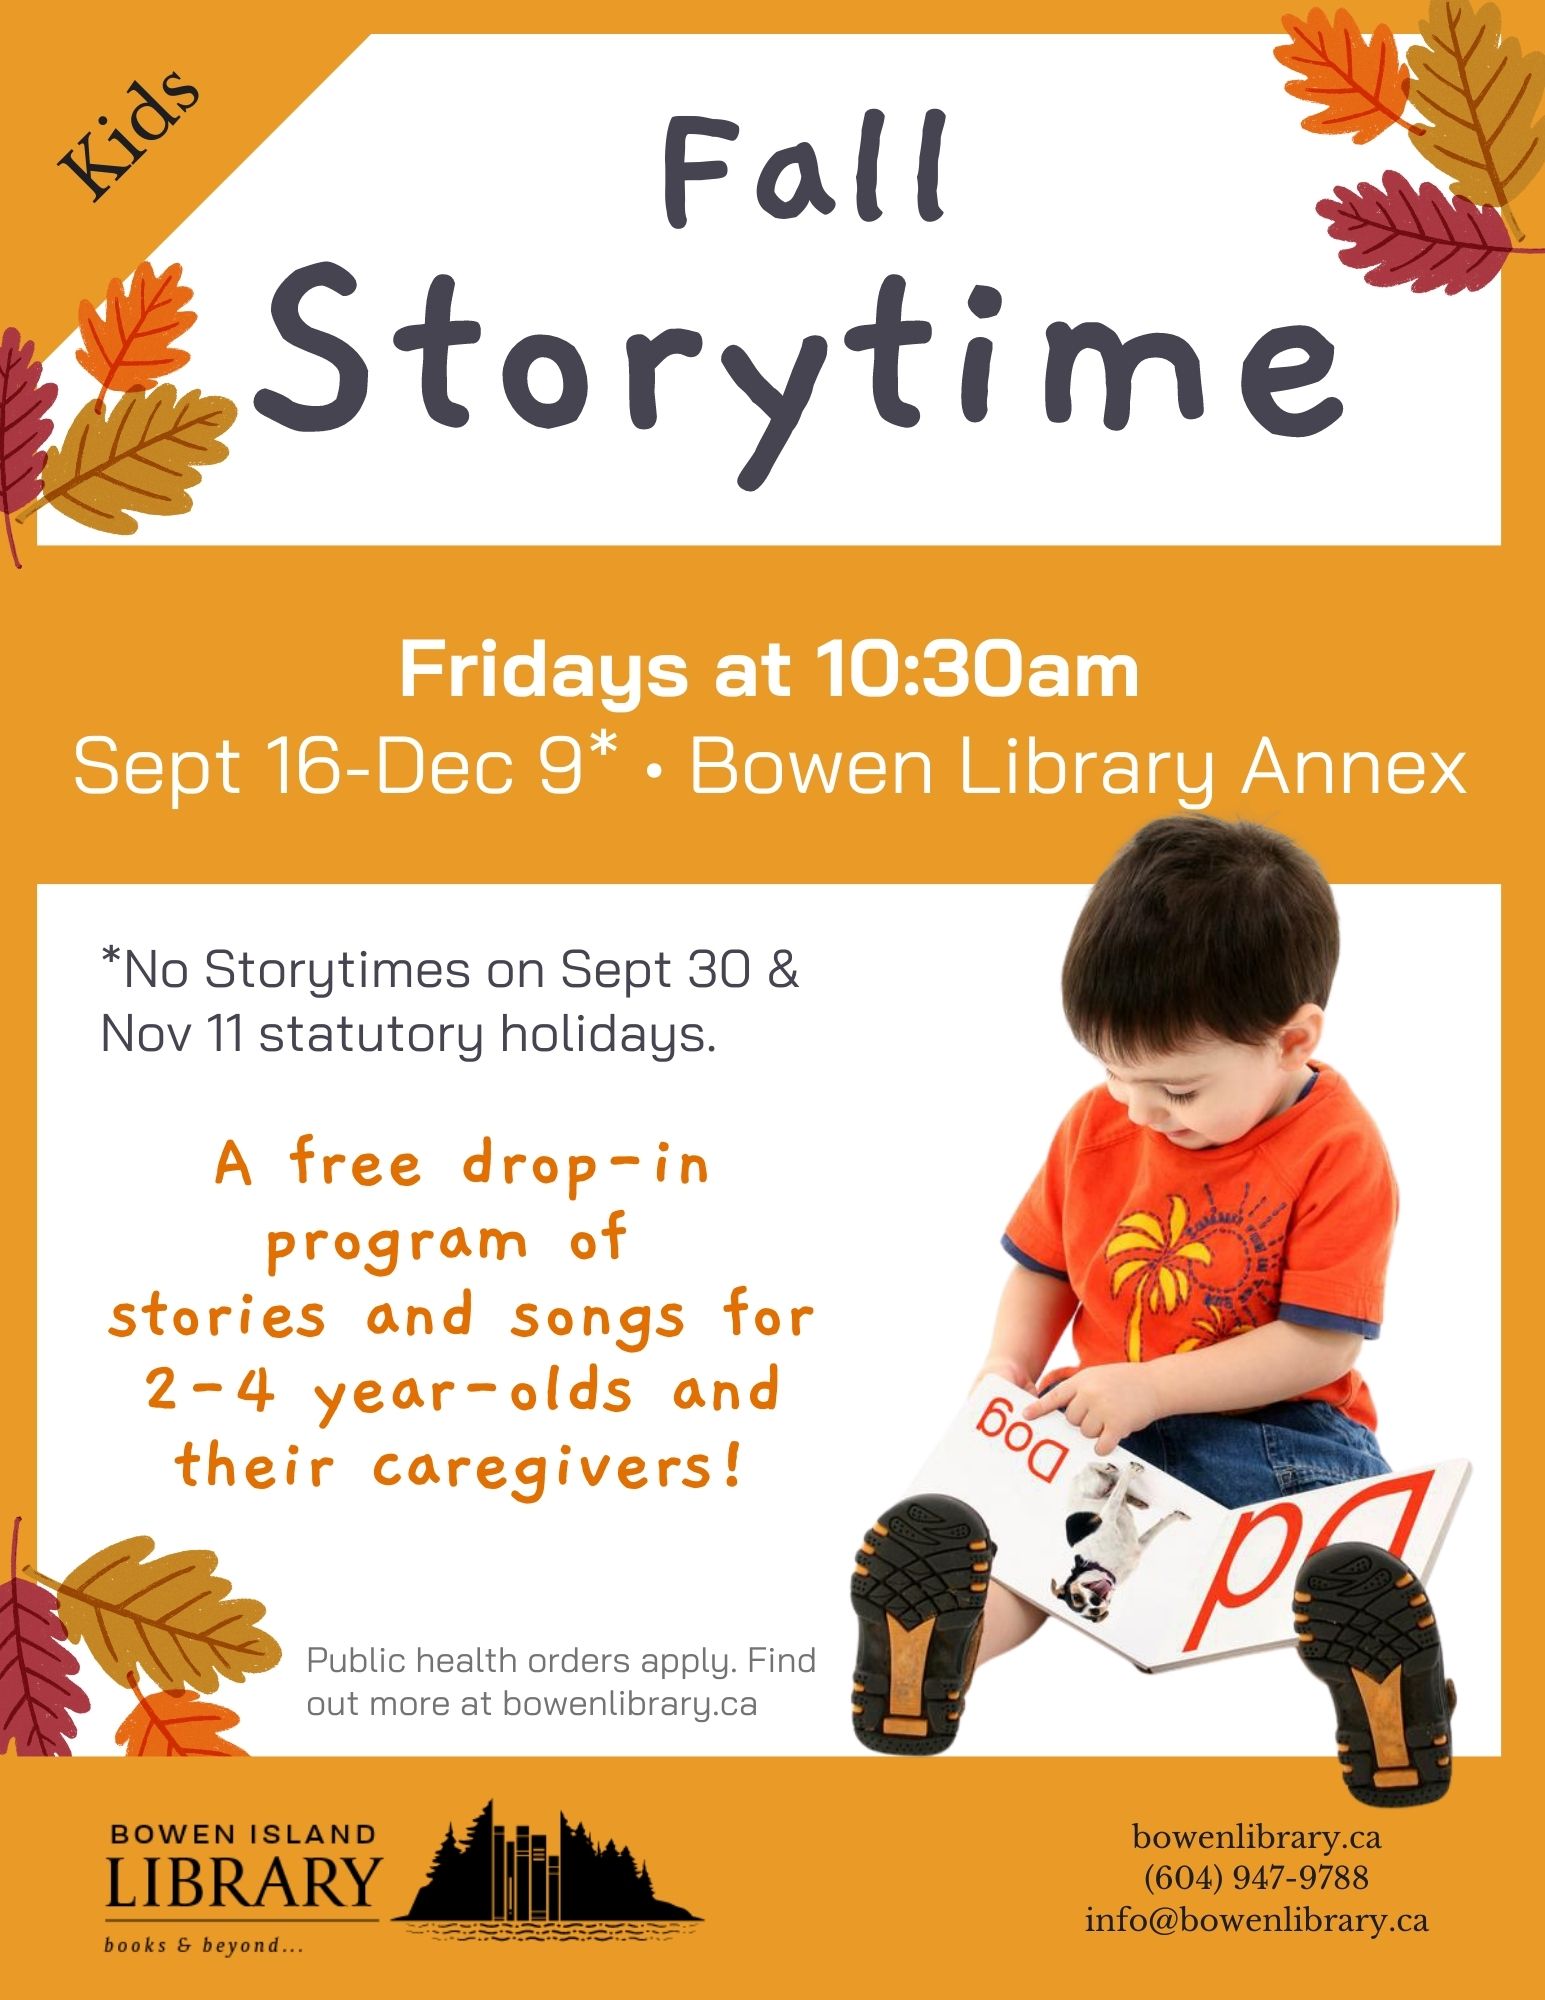 Image description: poster for Storytime program with photo of young child in orange shirt reading a book, with fall leaves.